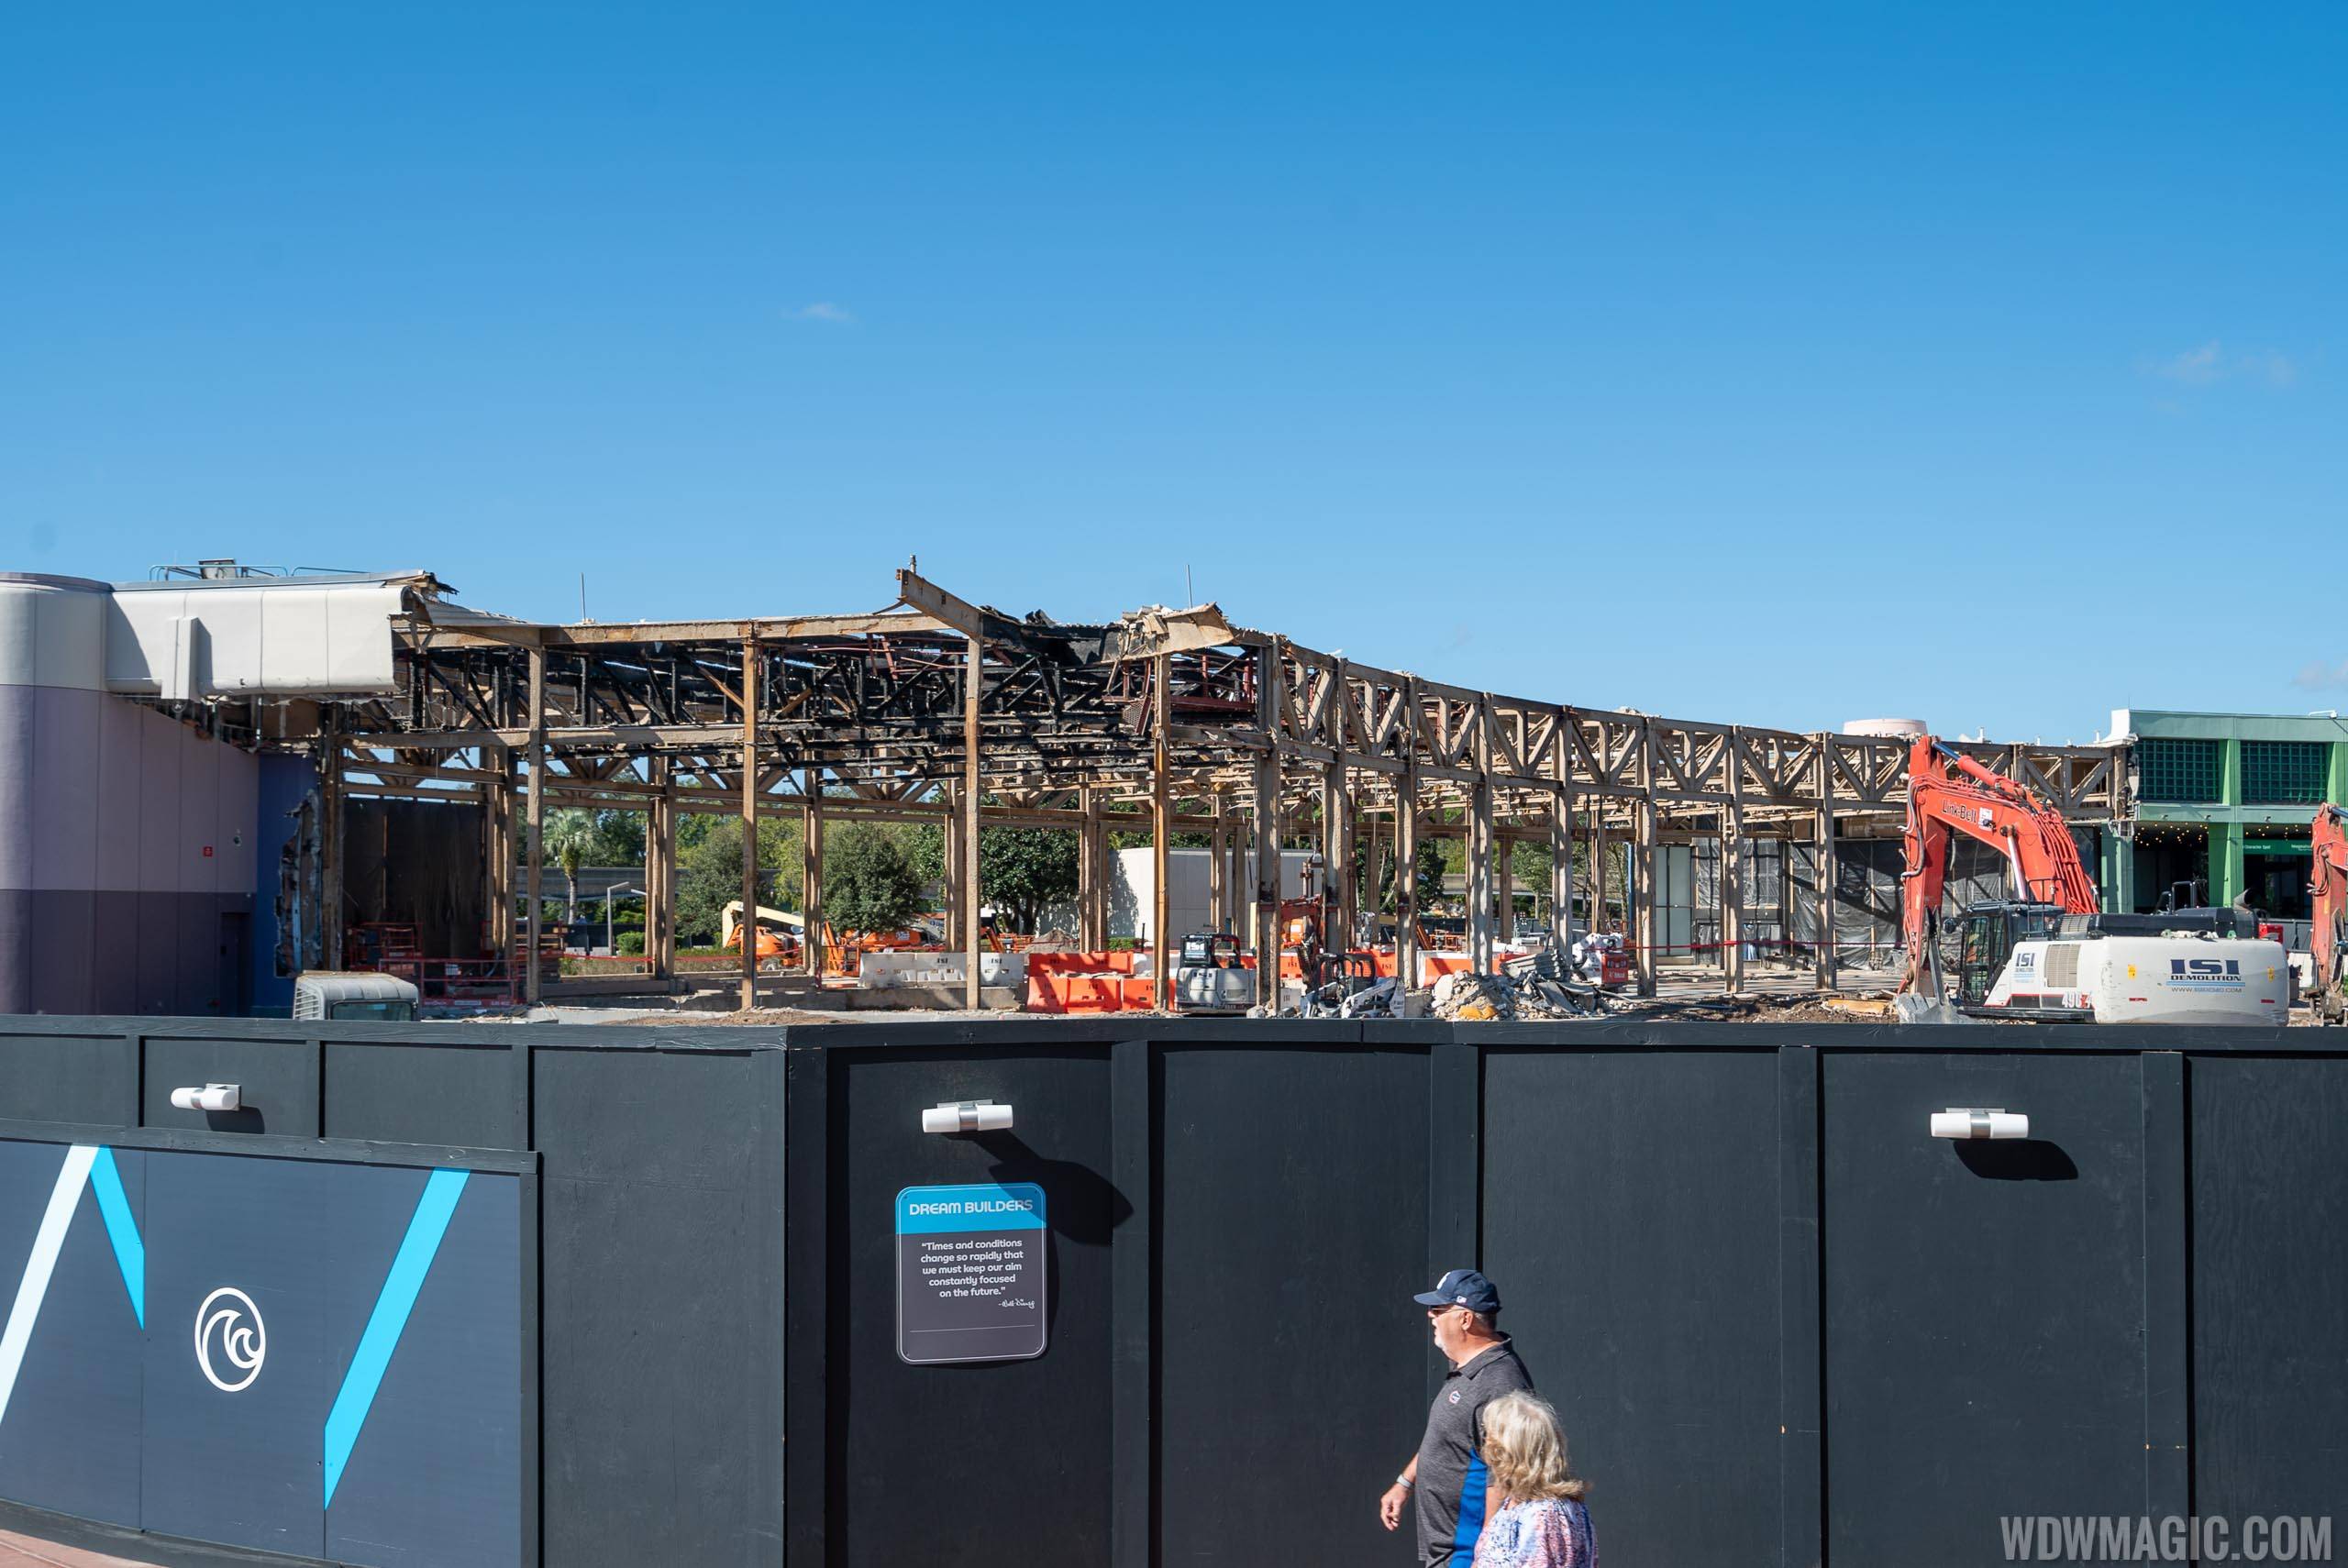 Epcot Future World West Demolition and Construction Walls - December 17 2019